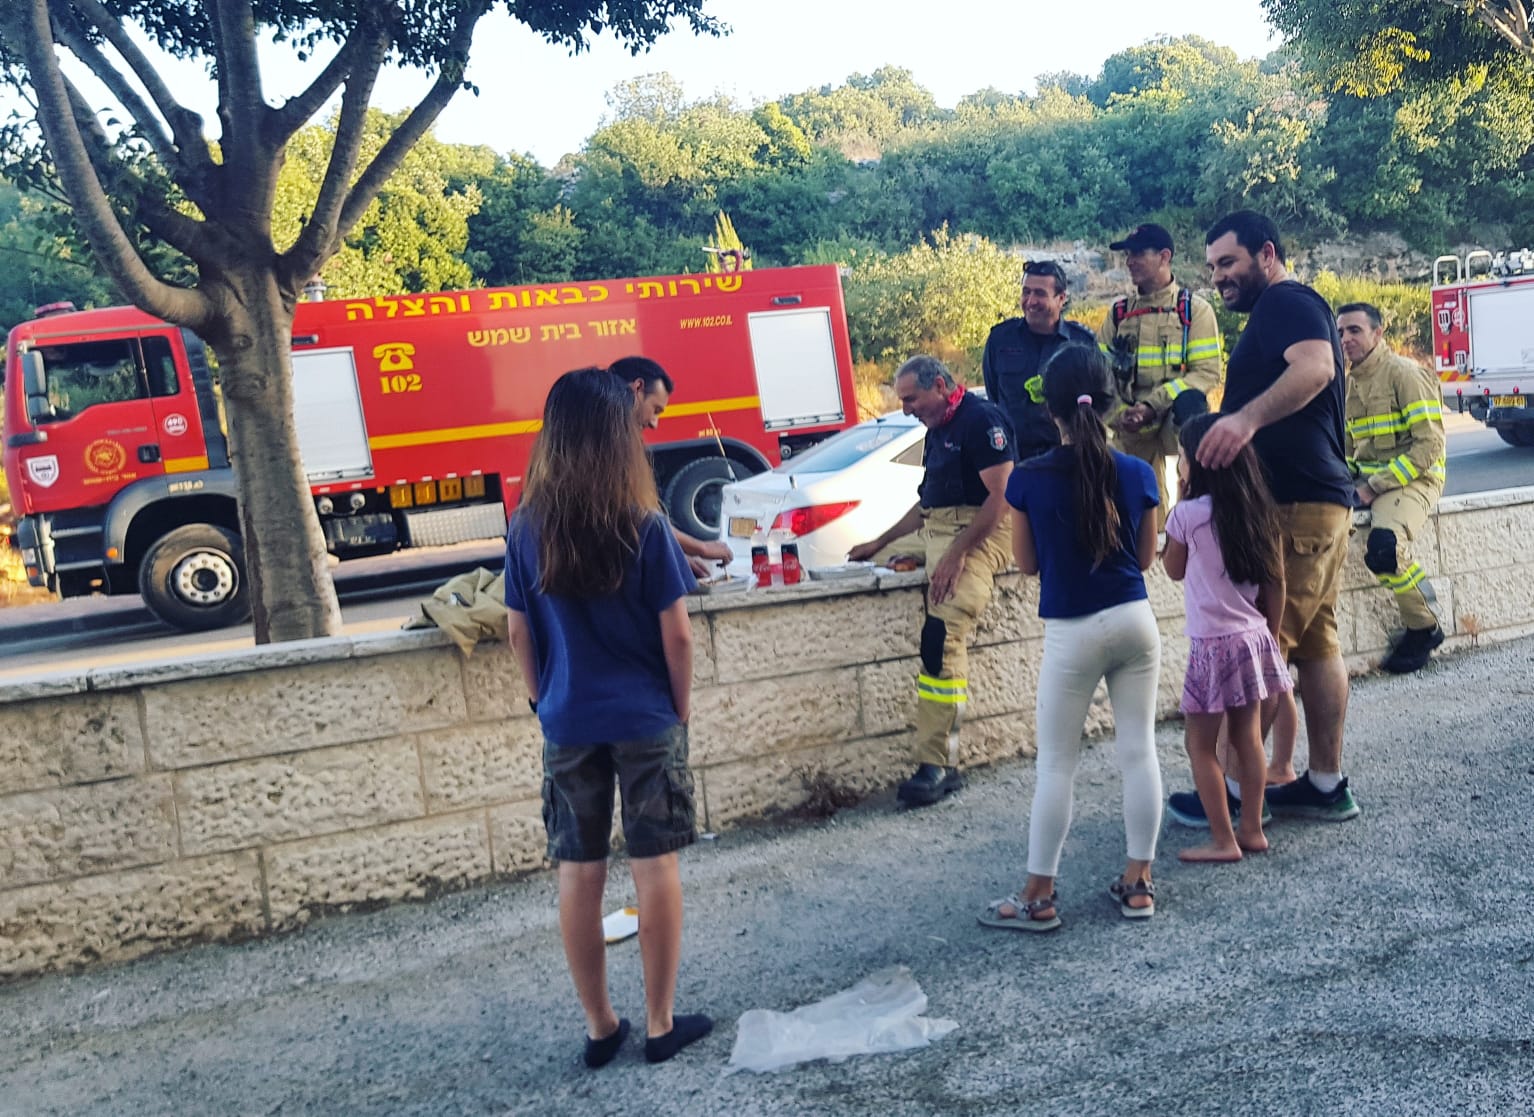 In awe of nature, fire, and humans – another day in Tzur Hadassah.